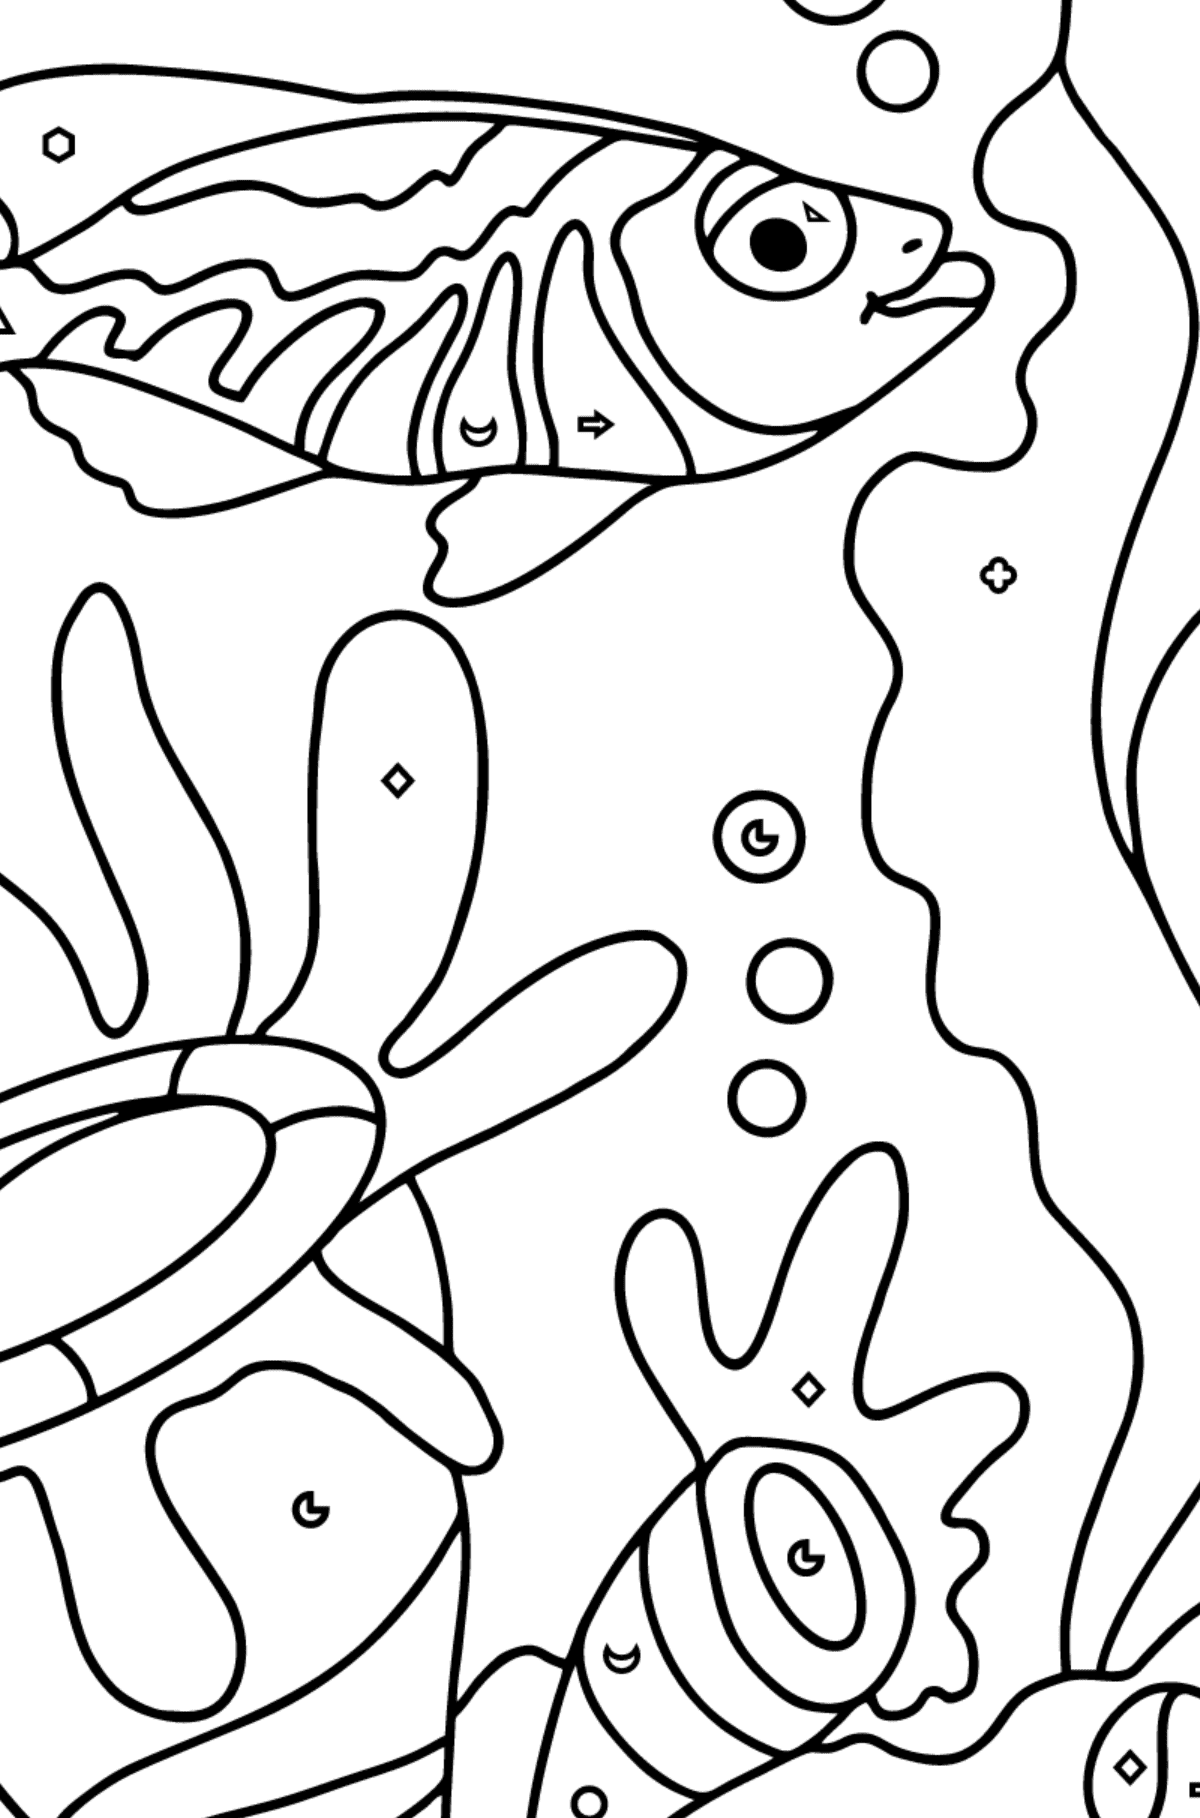 Coloring Page - A Fish is Admiring the Corals - Coloring by Symbols and Geometric Shapes for Kids